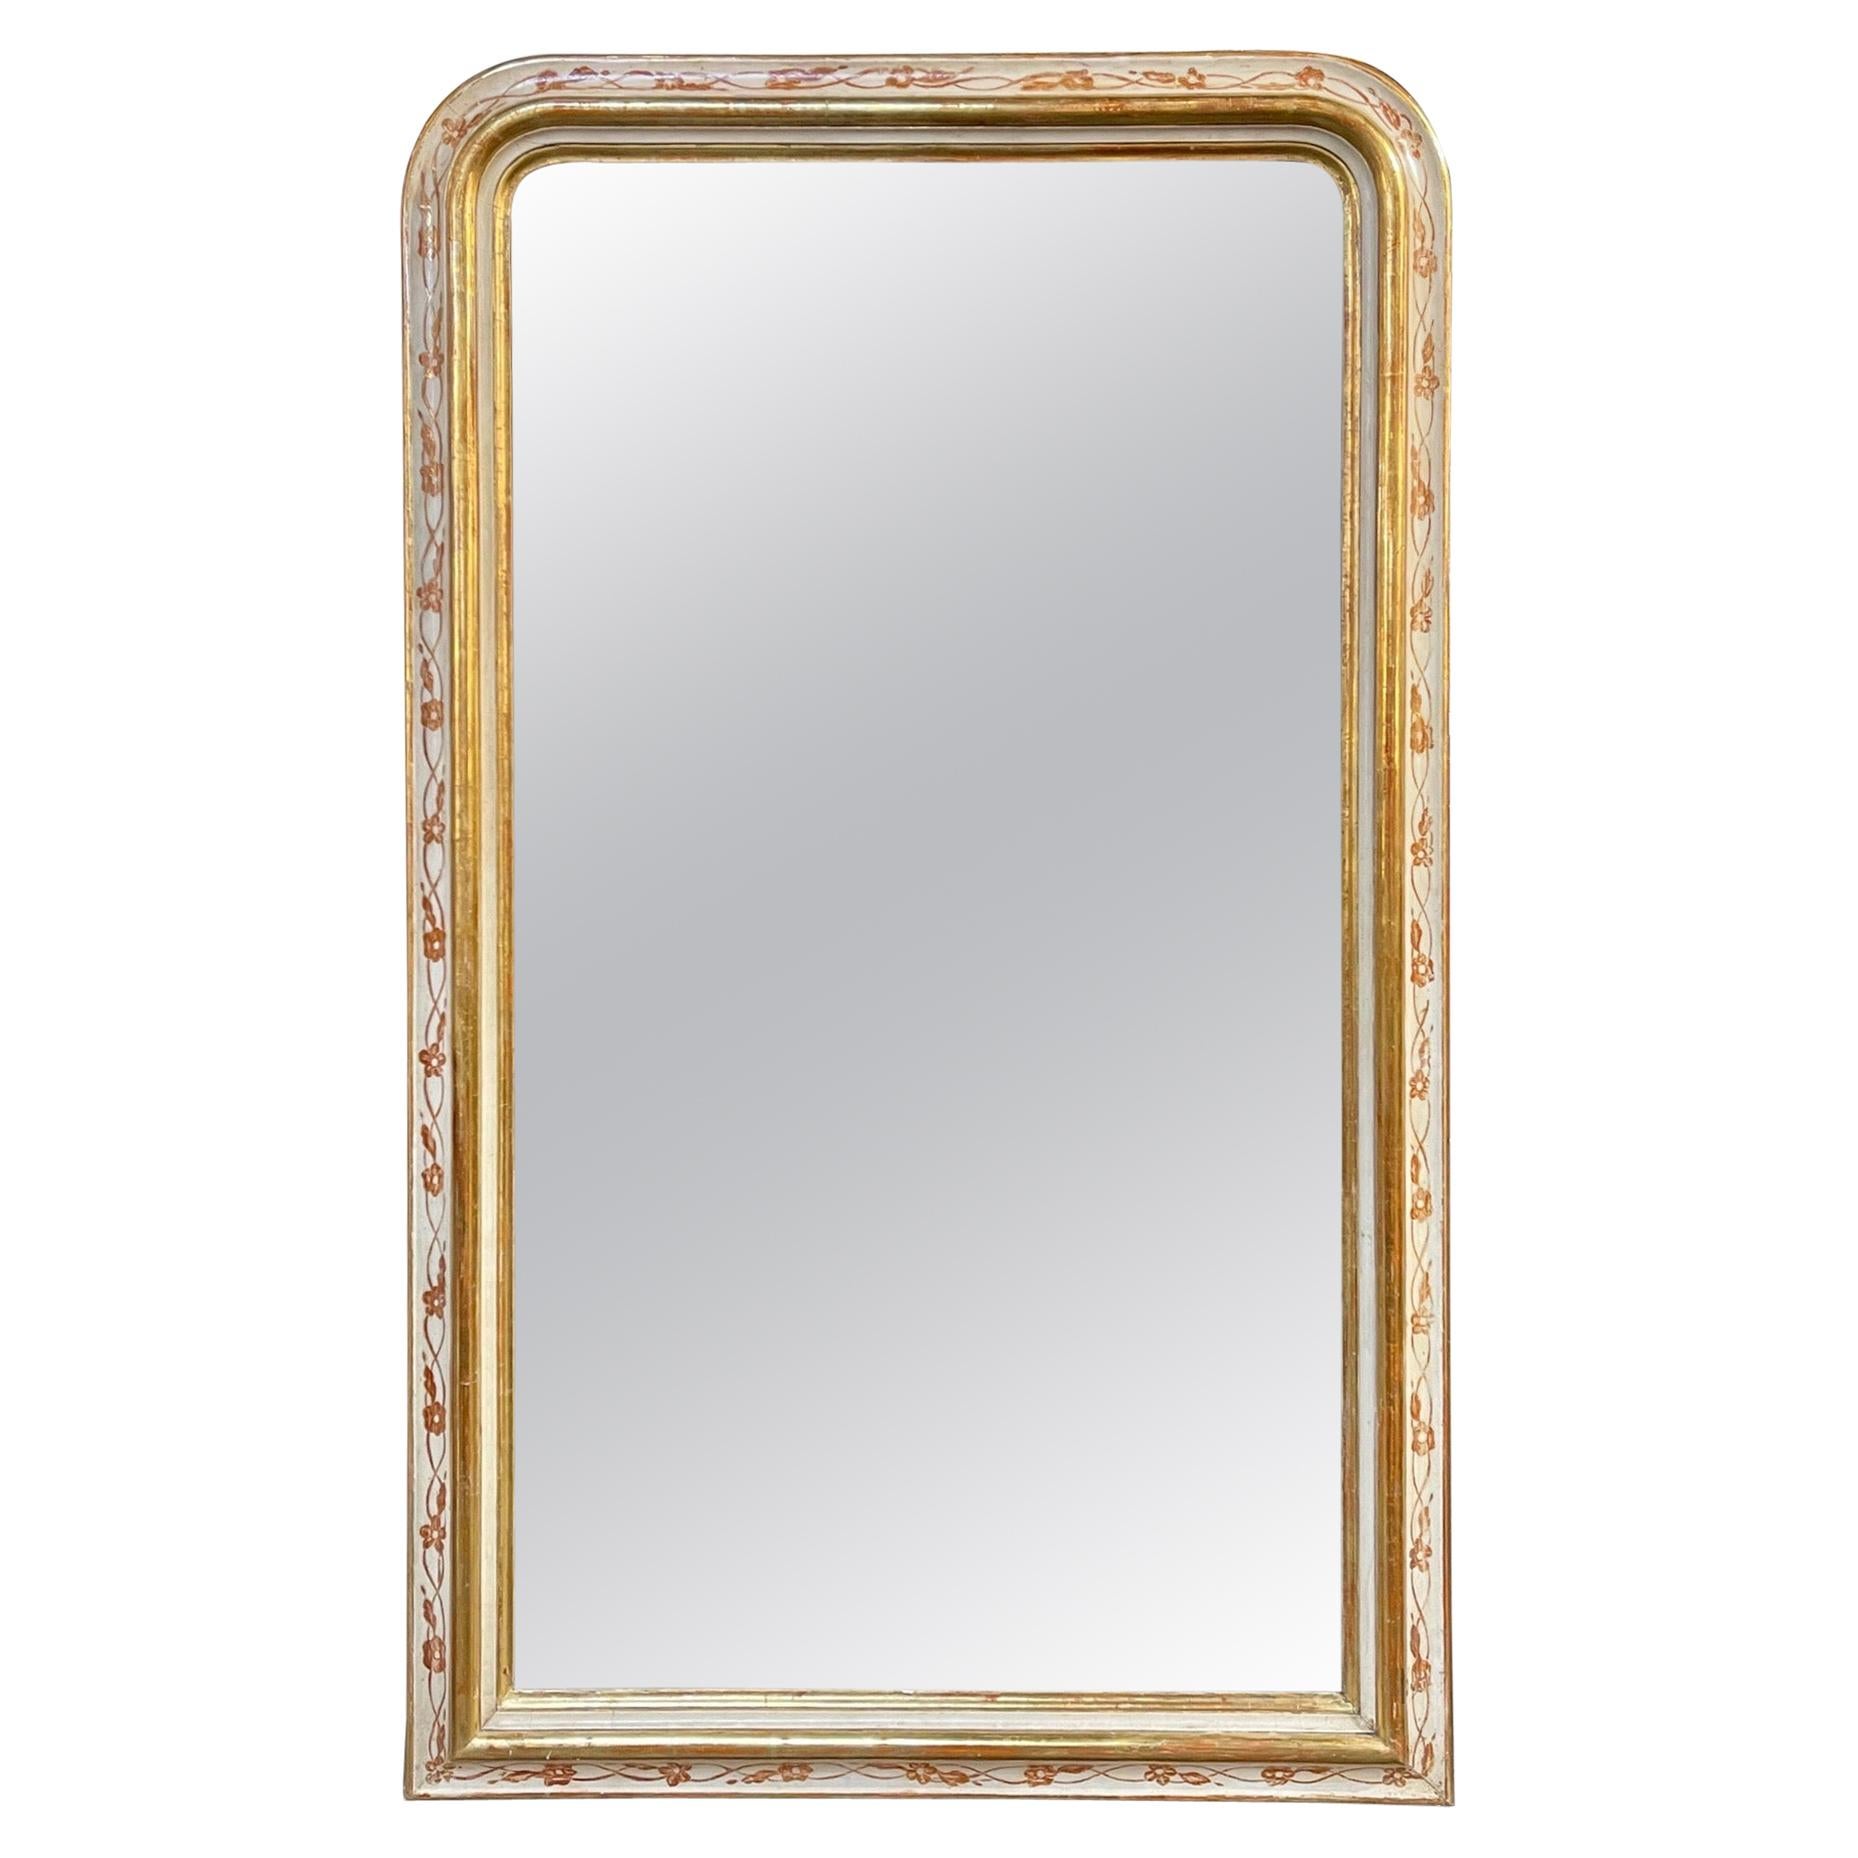 19th Century French Louis Philippe Mirror with Rare Gesso and Floral Pattern